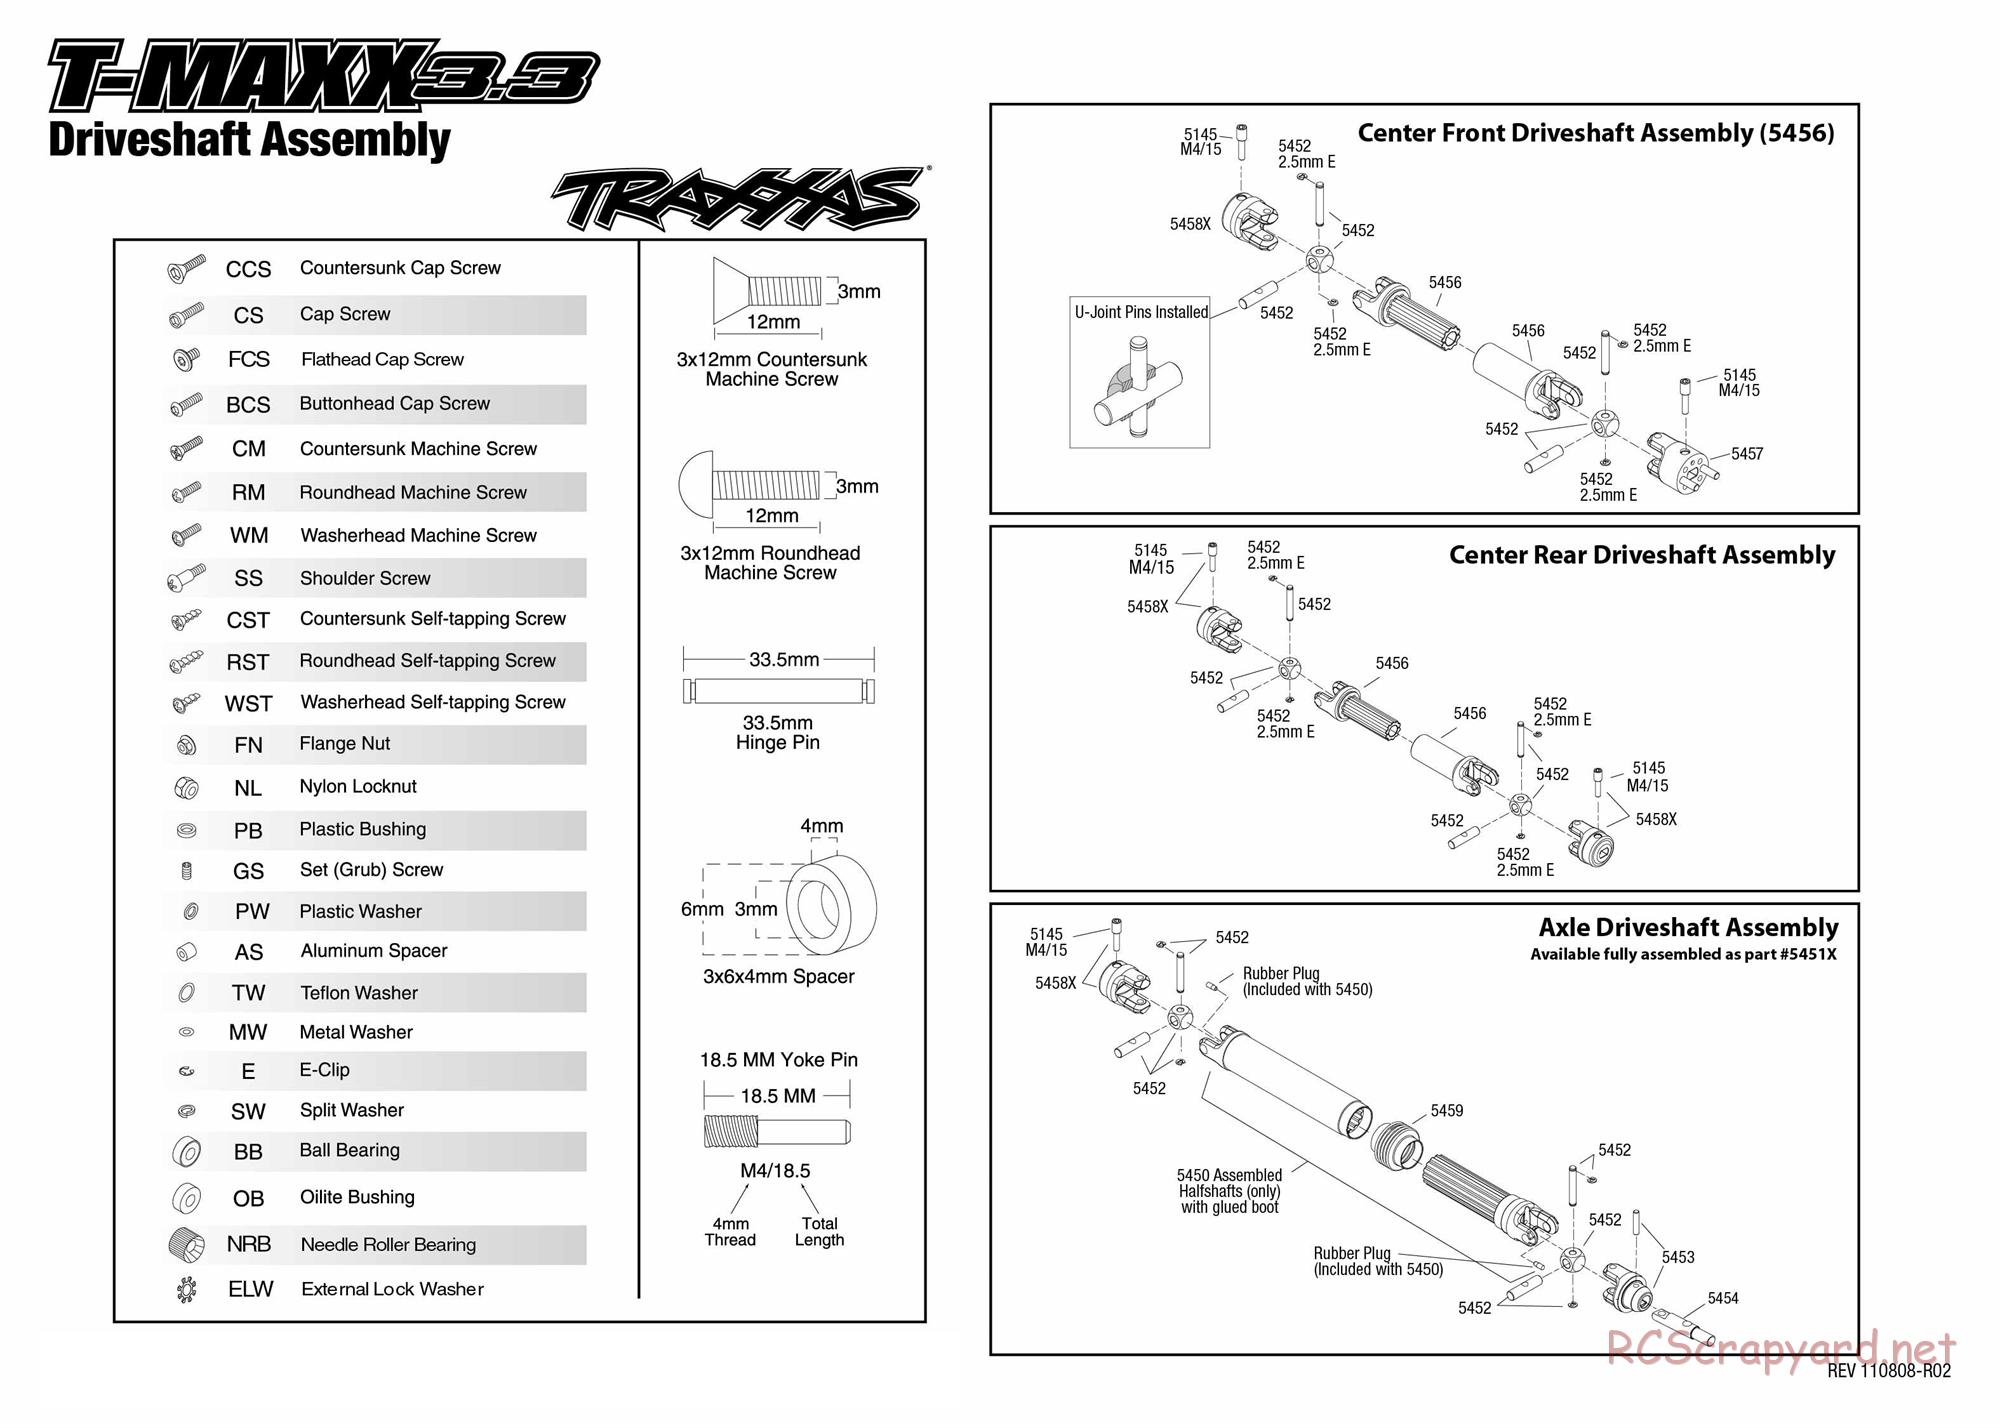 Traxxas - T-Maxx 3.3 (2010) - Exploded Views - Page 2